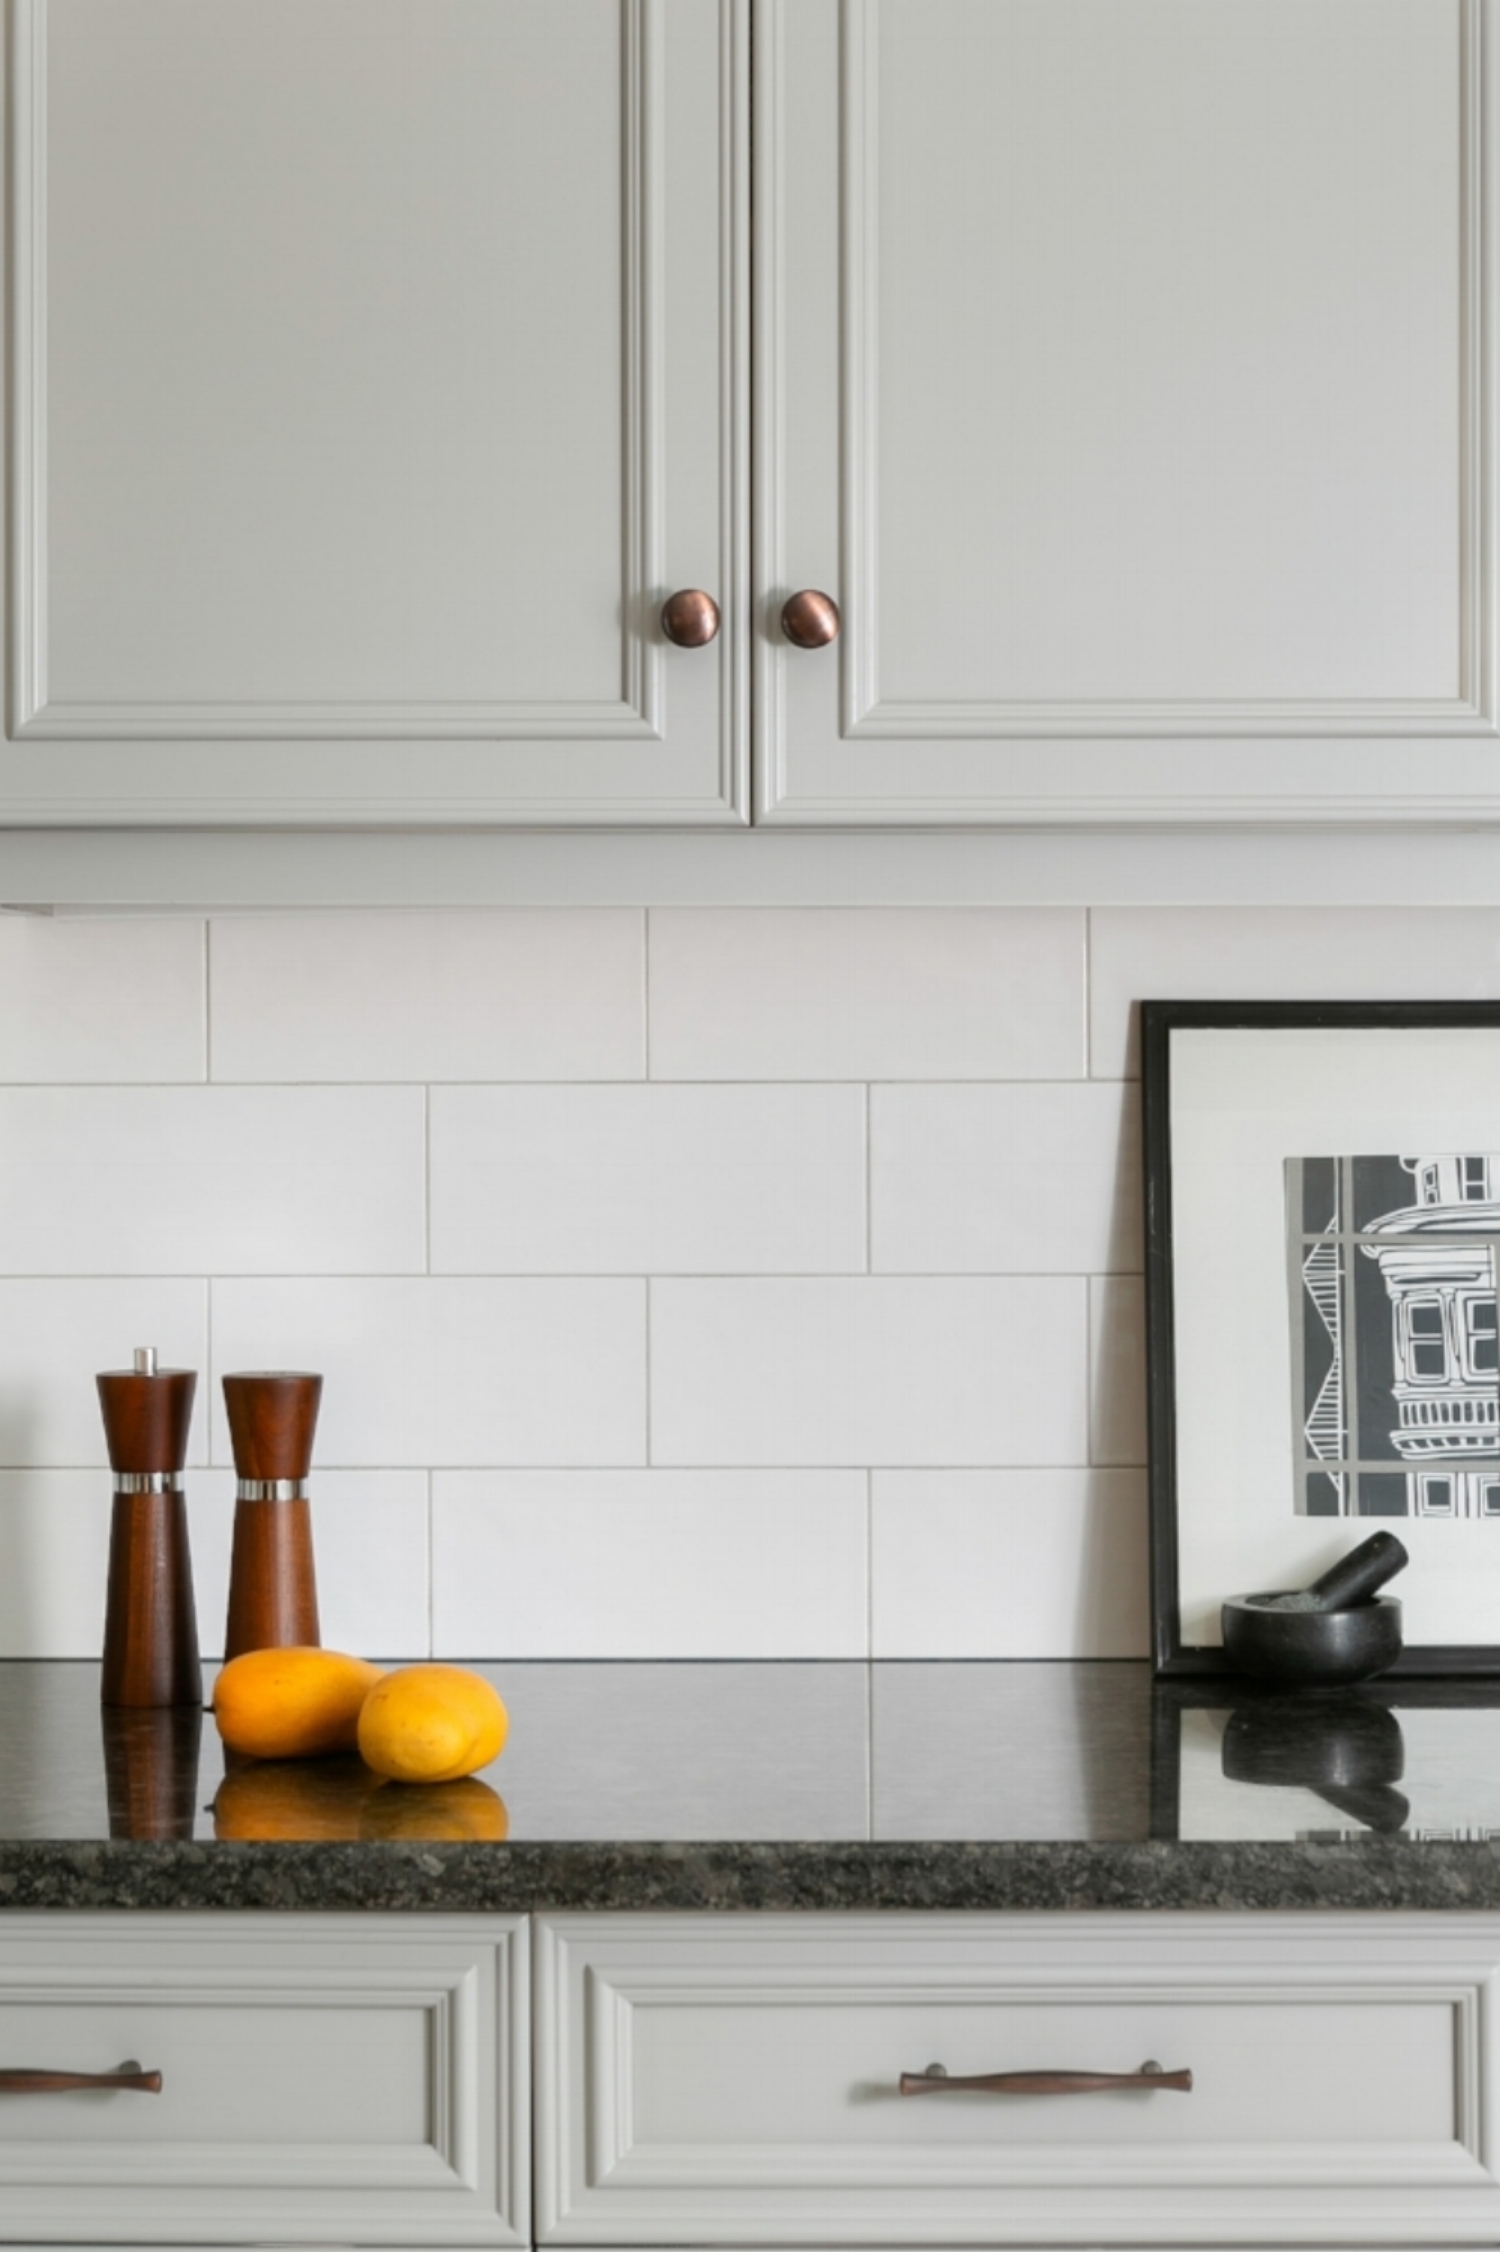  Medium gray cabinets add interest to the kitchen while providing a neutral pallette. 